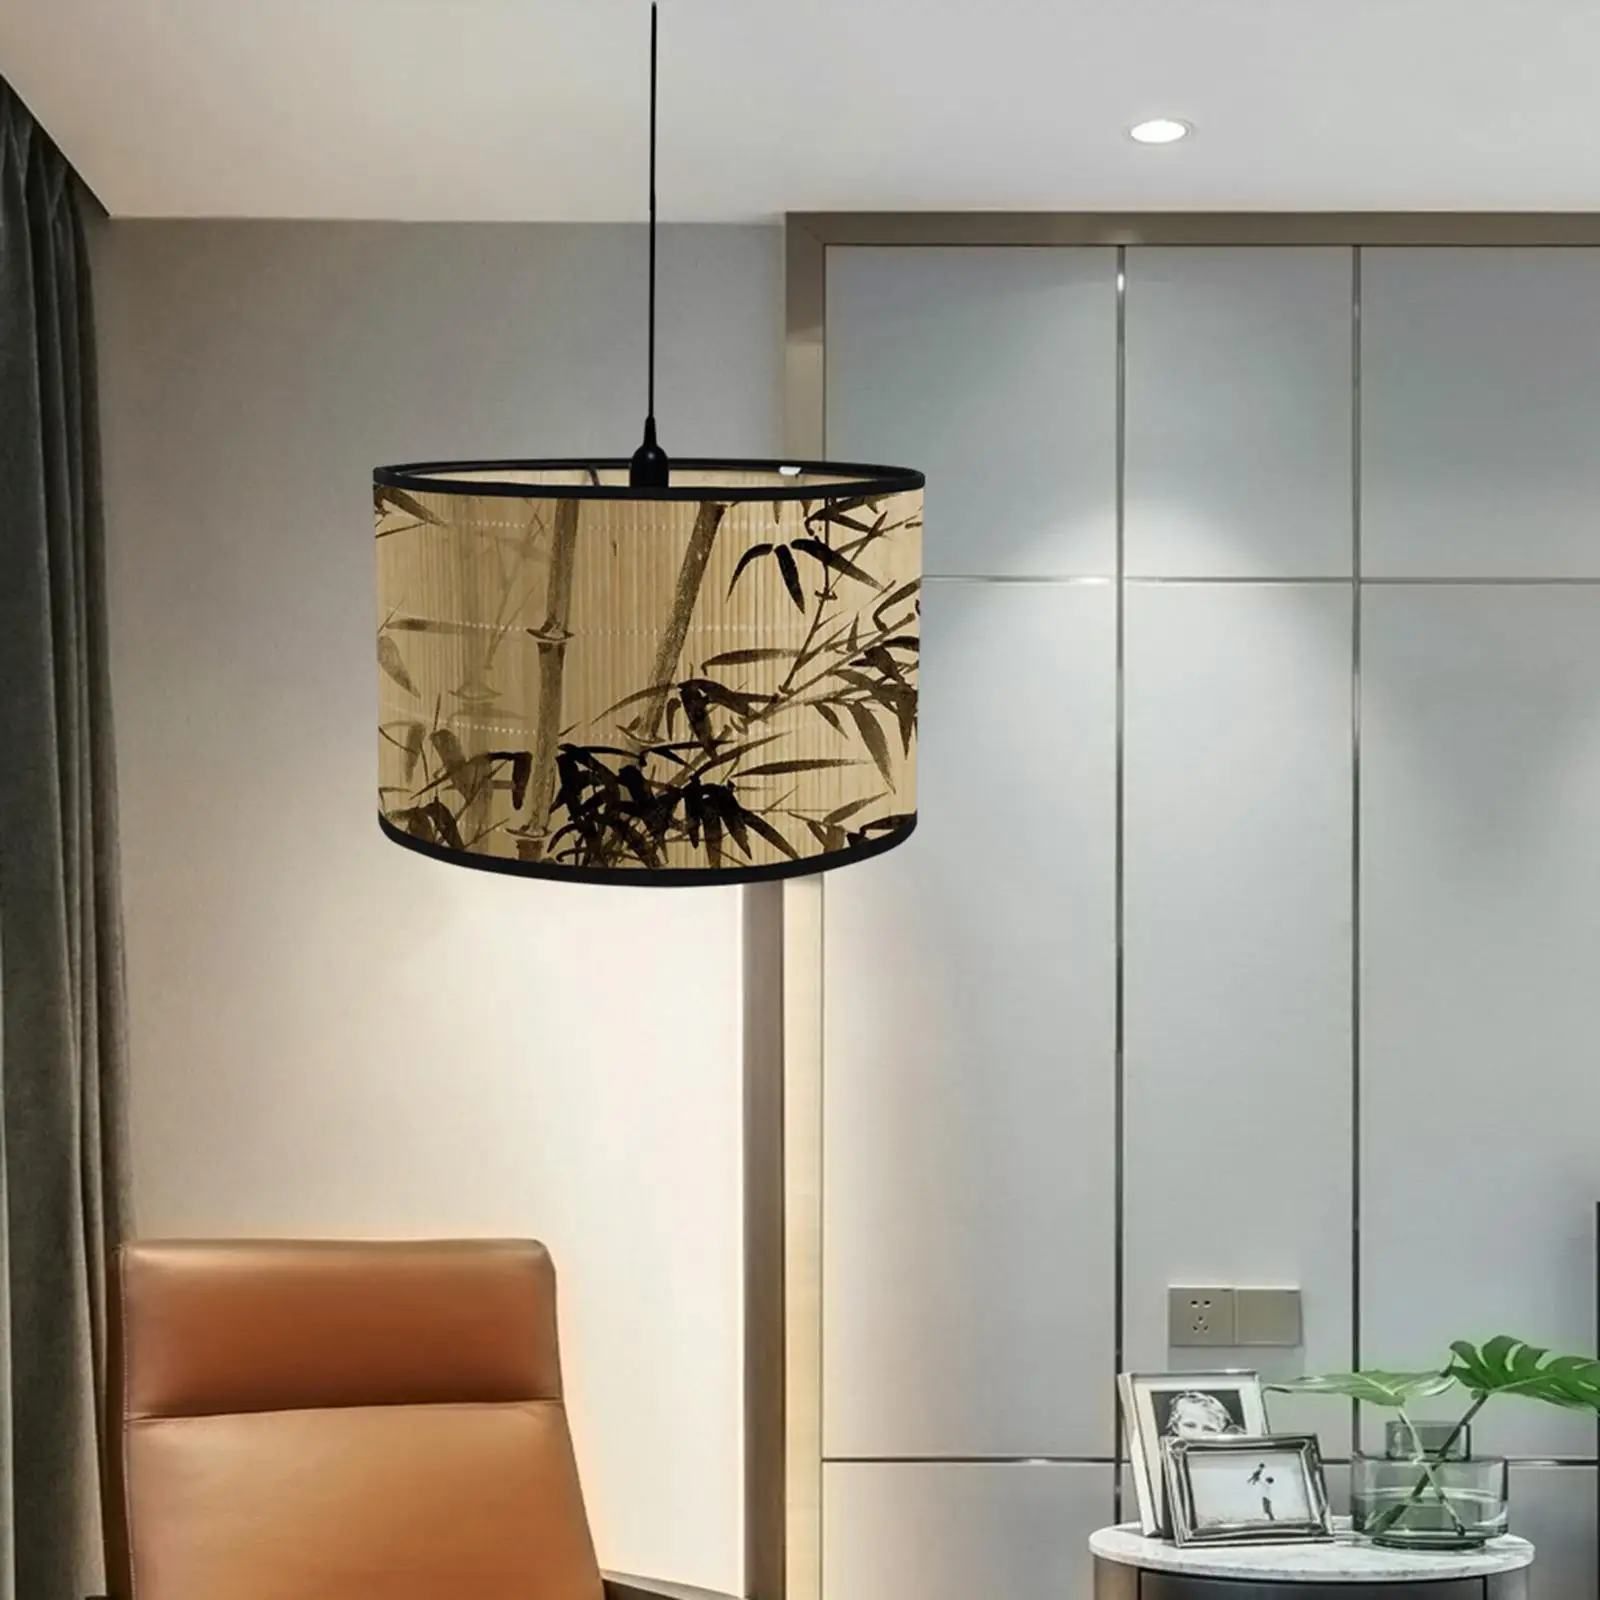 Classic Bamboo Lamp Shade Ceiling Light Fixture Lampshade Pendant Light Decoration Chandelier Fitting for Office Droplight